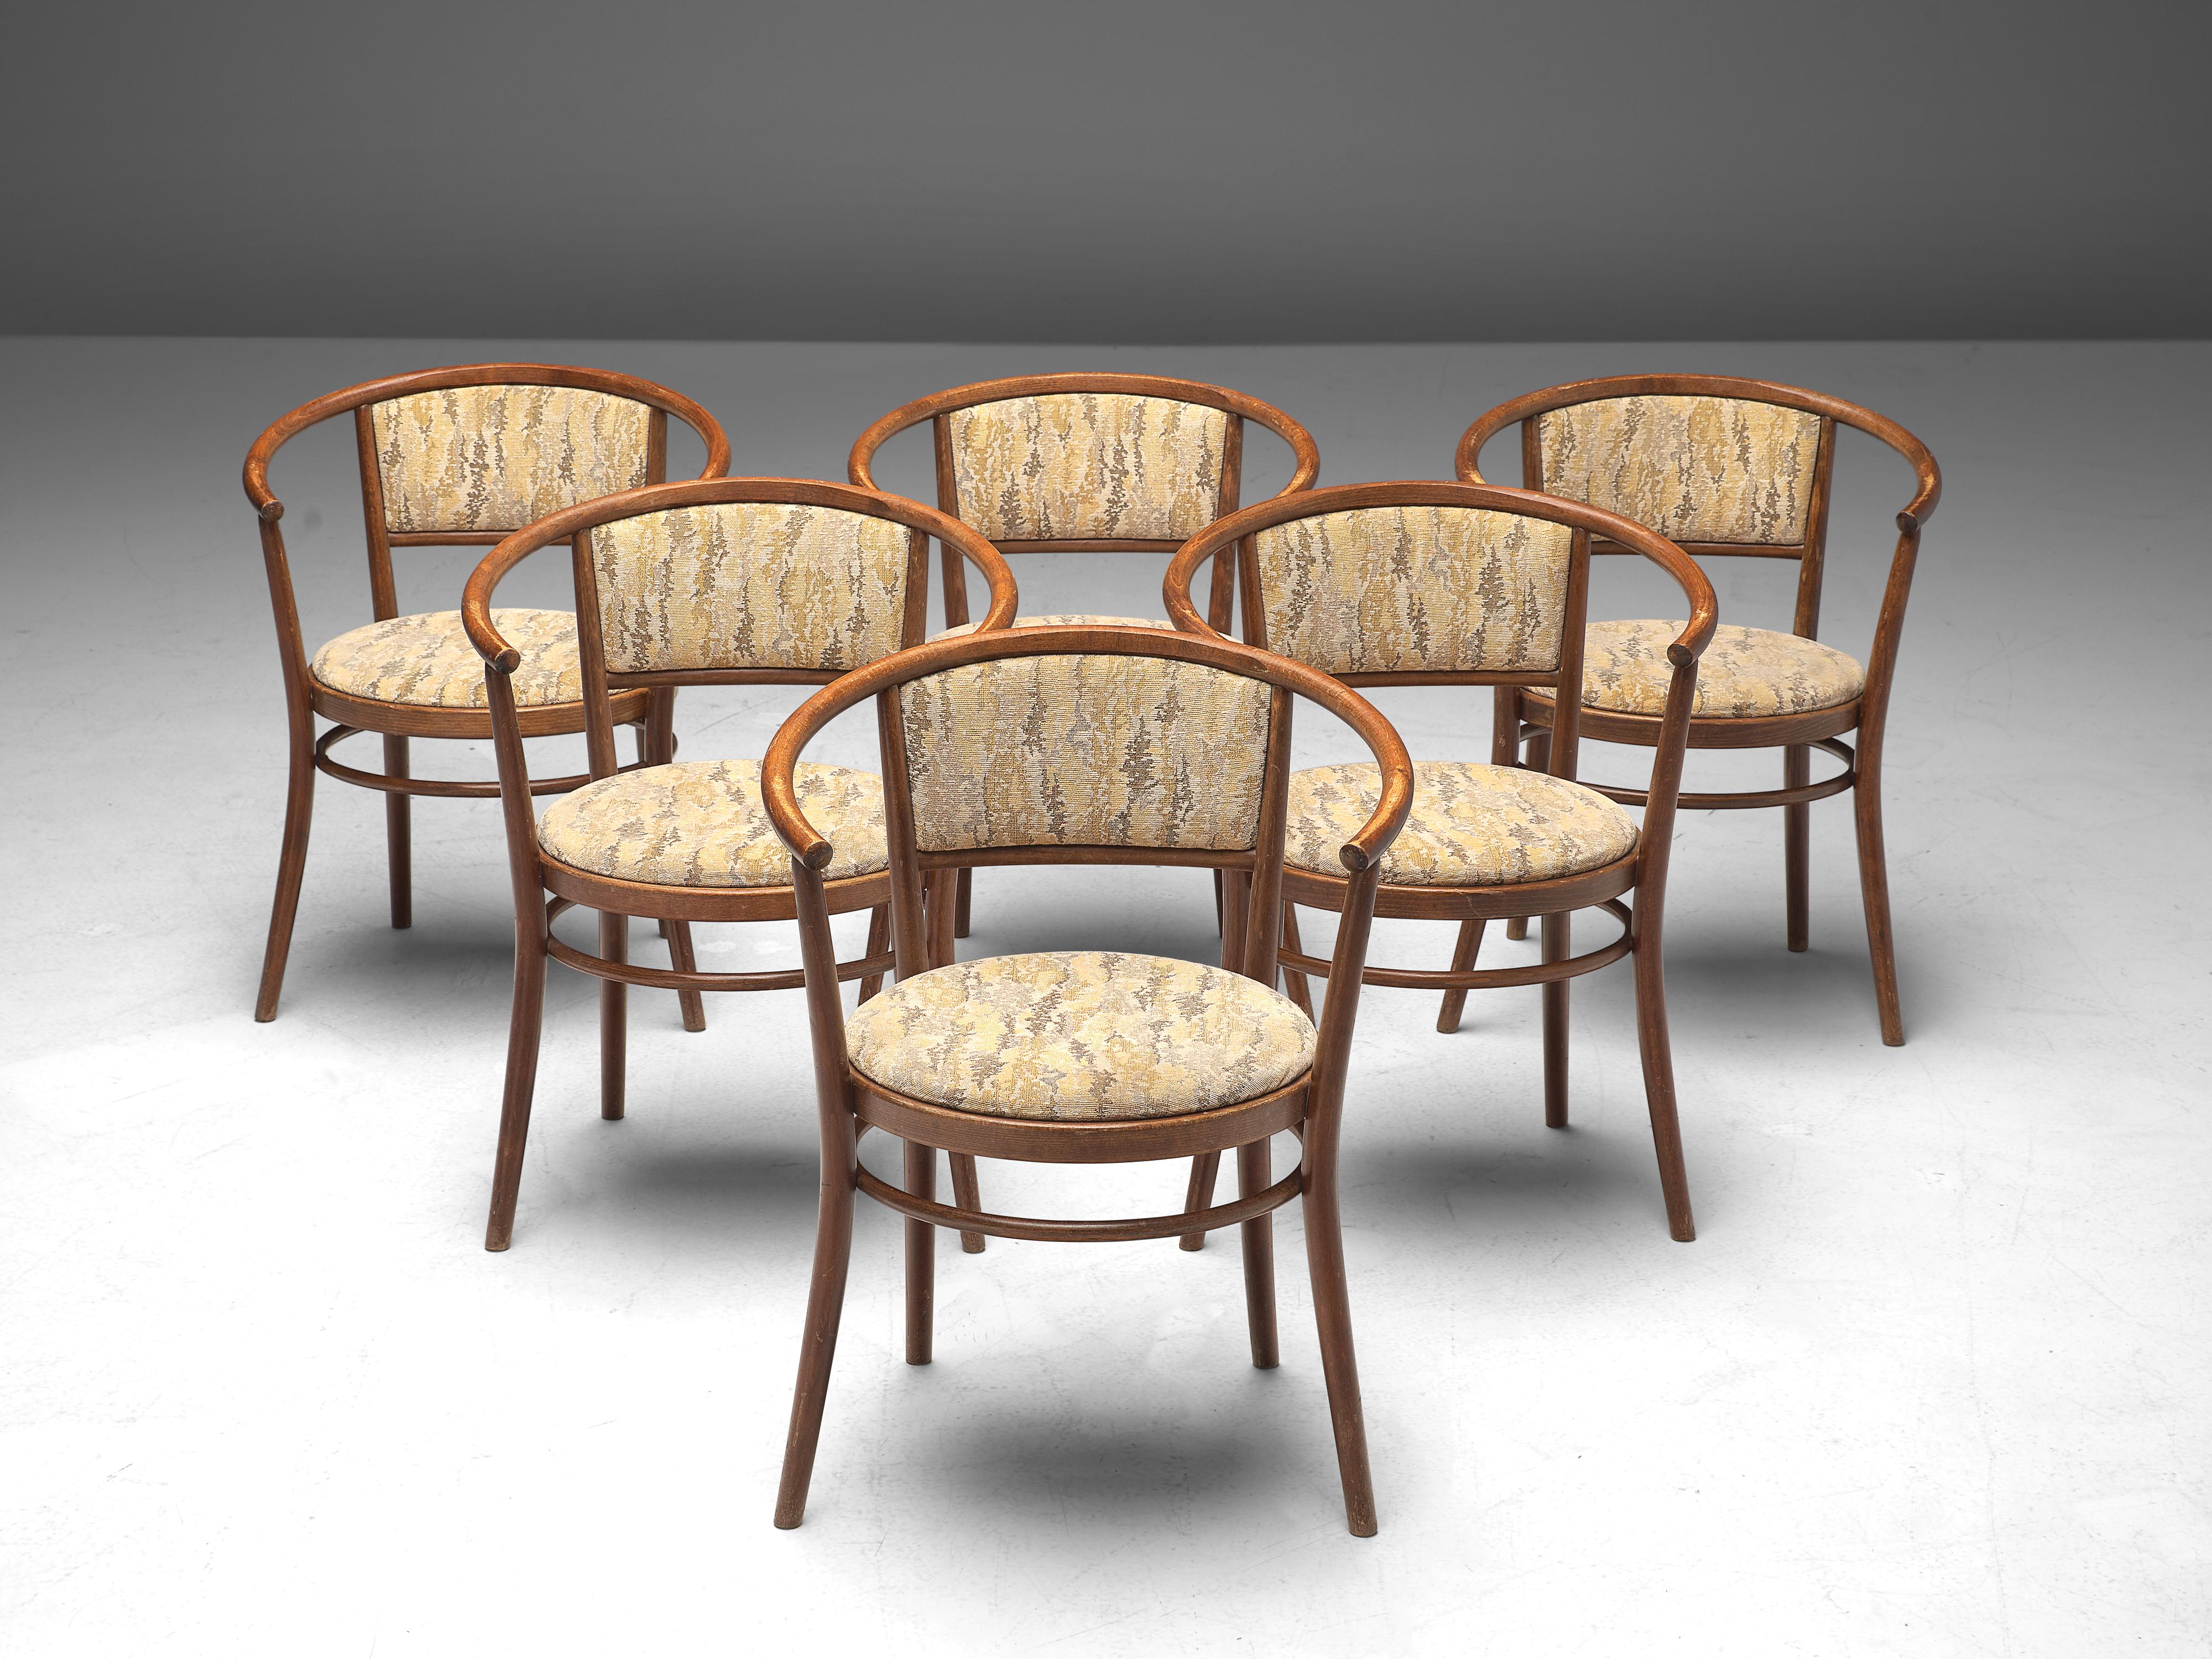 Ton, set of armchairs, bentwood, fabric upholstery, Czech Republic, 1960s

This elegant set of dining chairs, manufactured by Ton, features a wonderful bentwood frame. The round shape of the backrest surrounds the user. The seat and backrest are